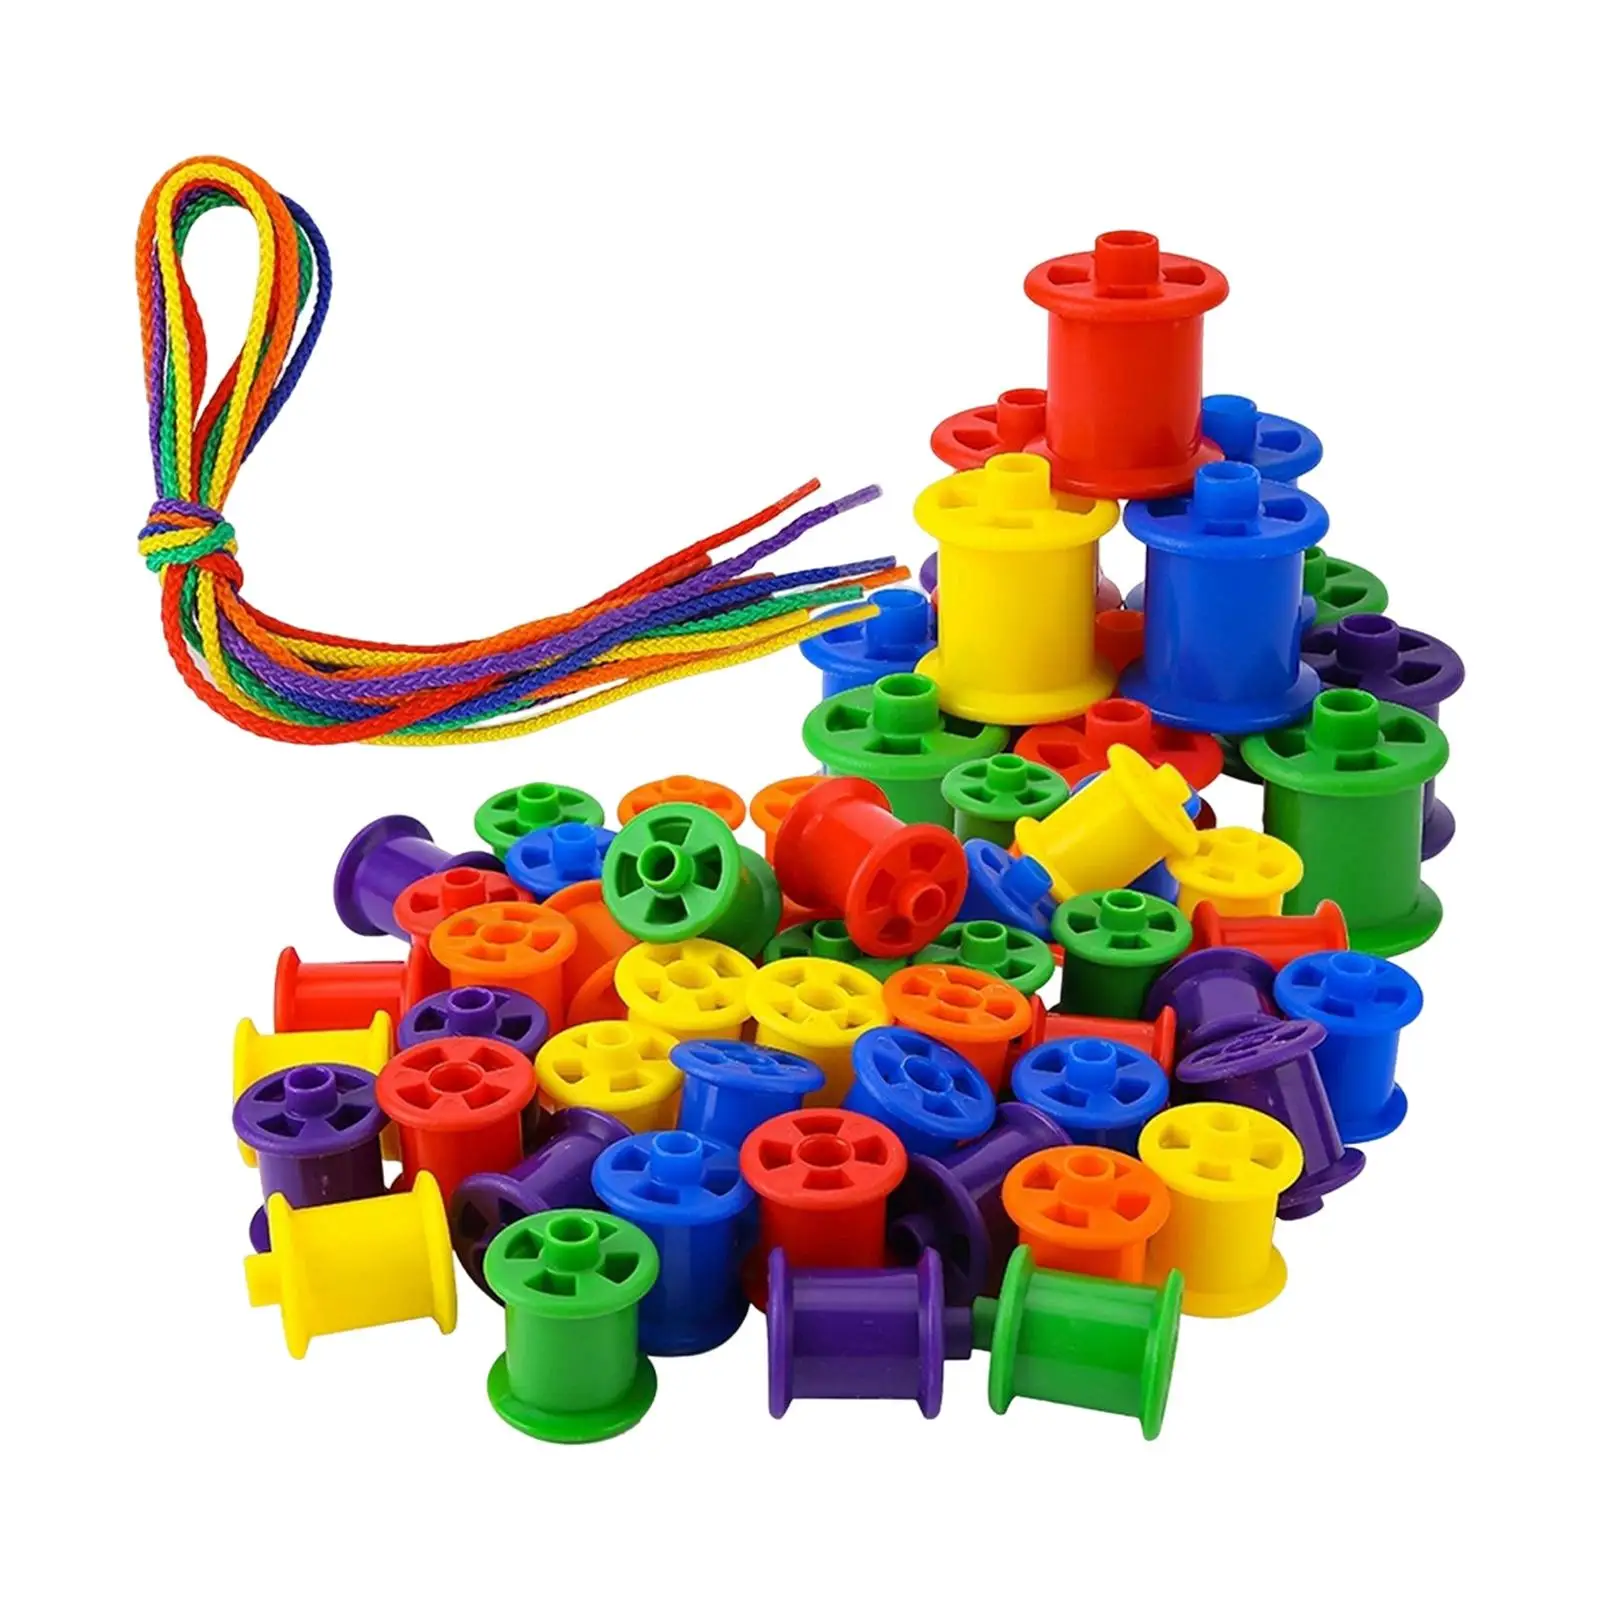 Lacing Beads Toy Party Favors Present for Kindergarten Learning Activities